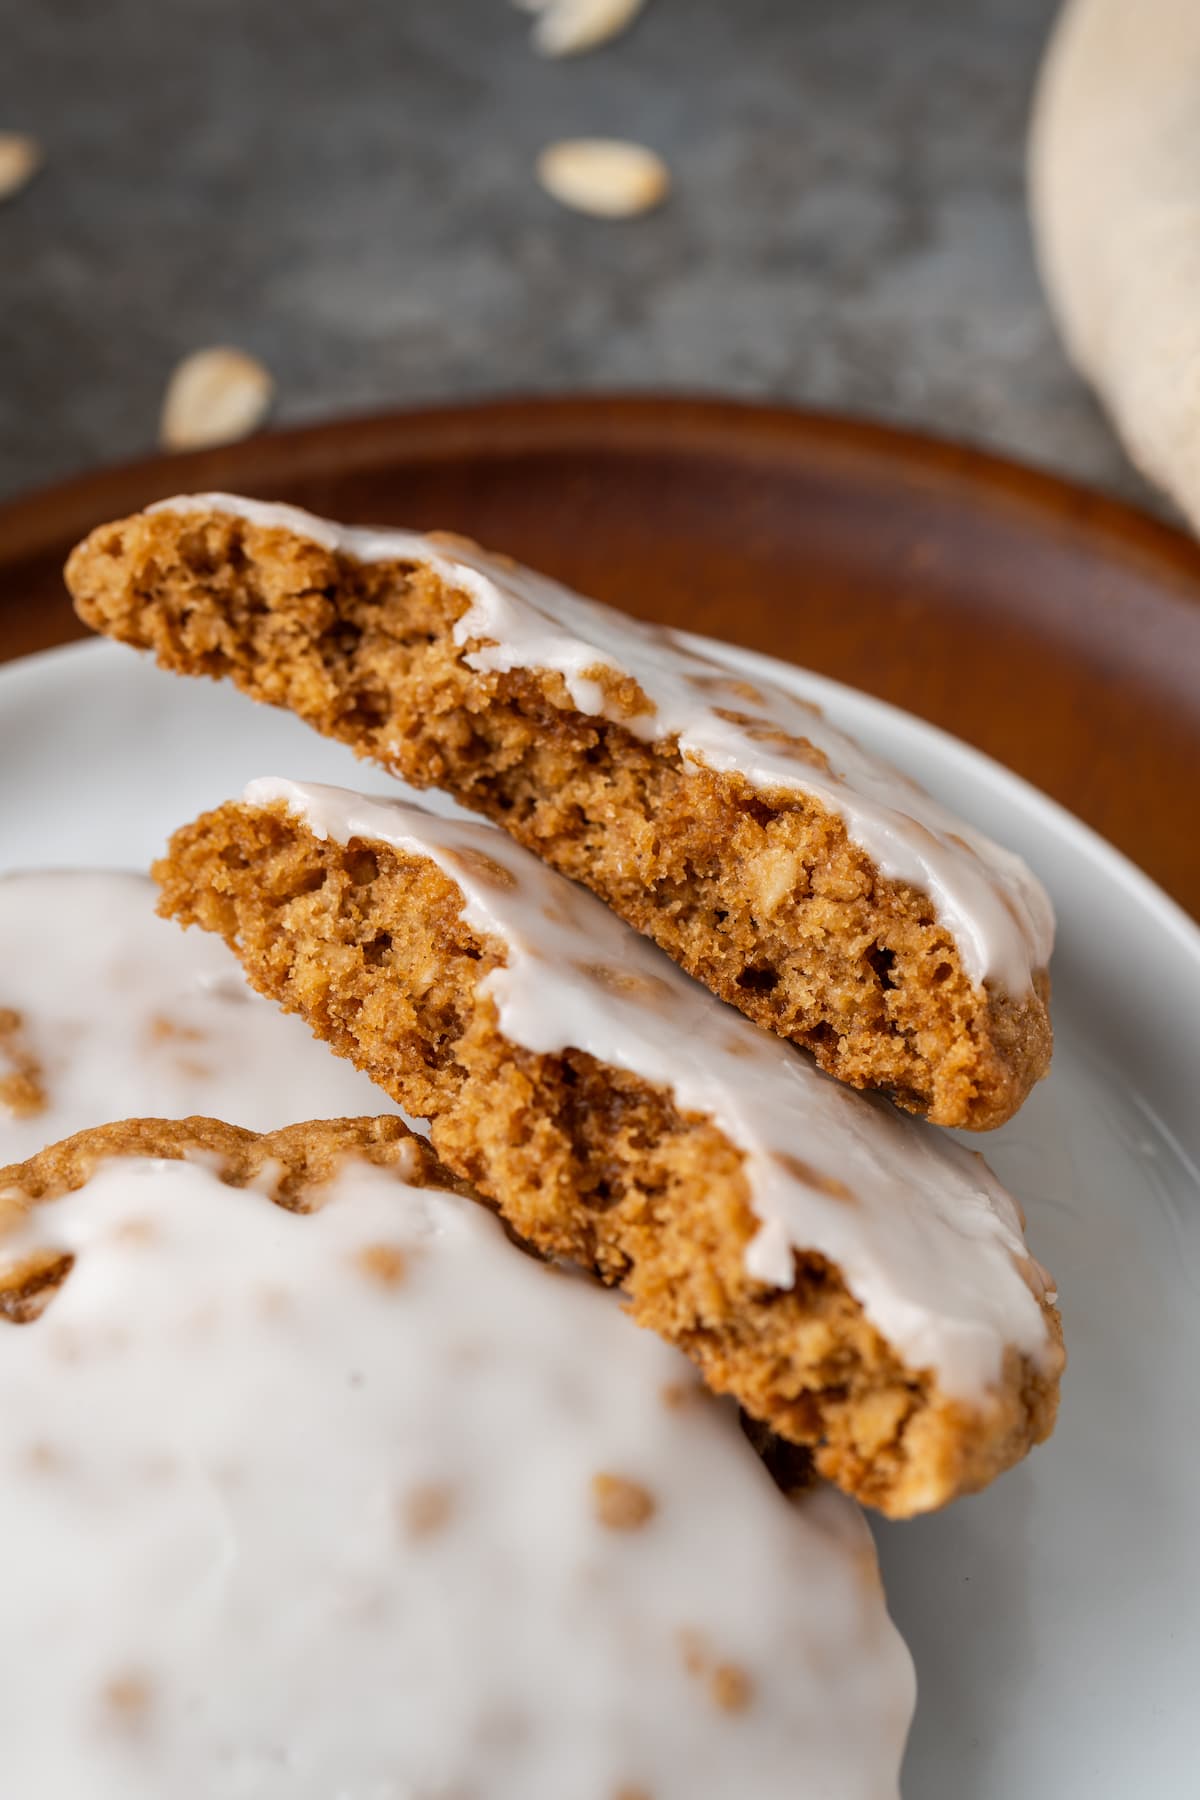 Close up of an iced oatmeal cookie broken in half, leaning against a stack of cookies on a plate.